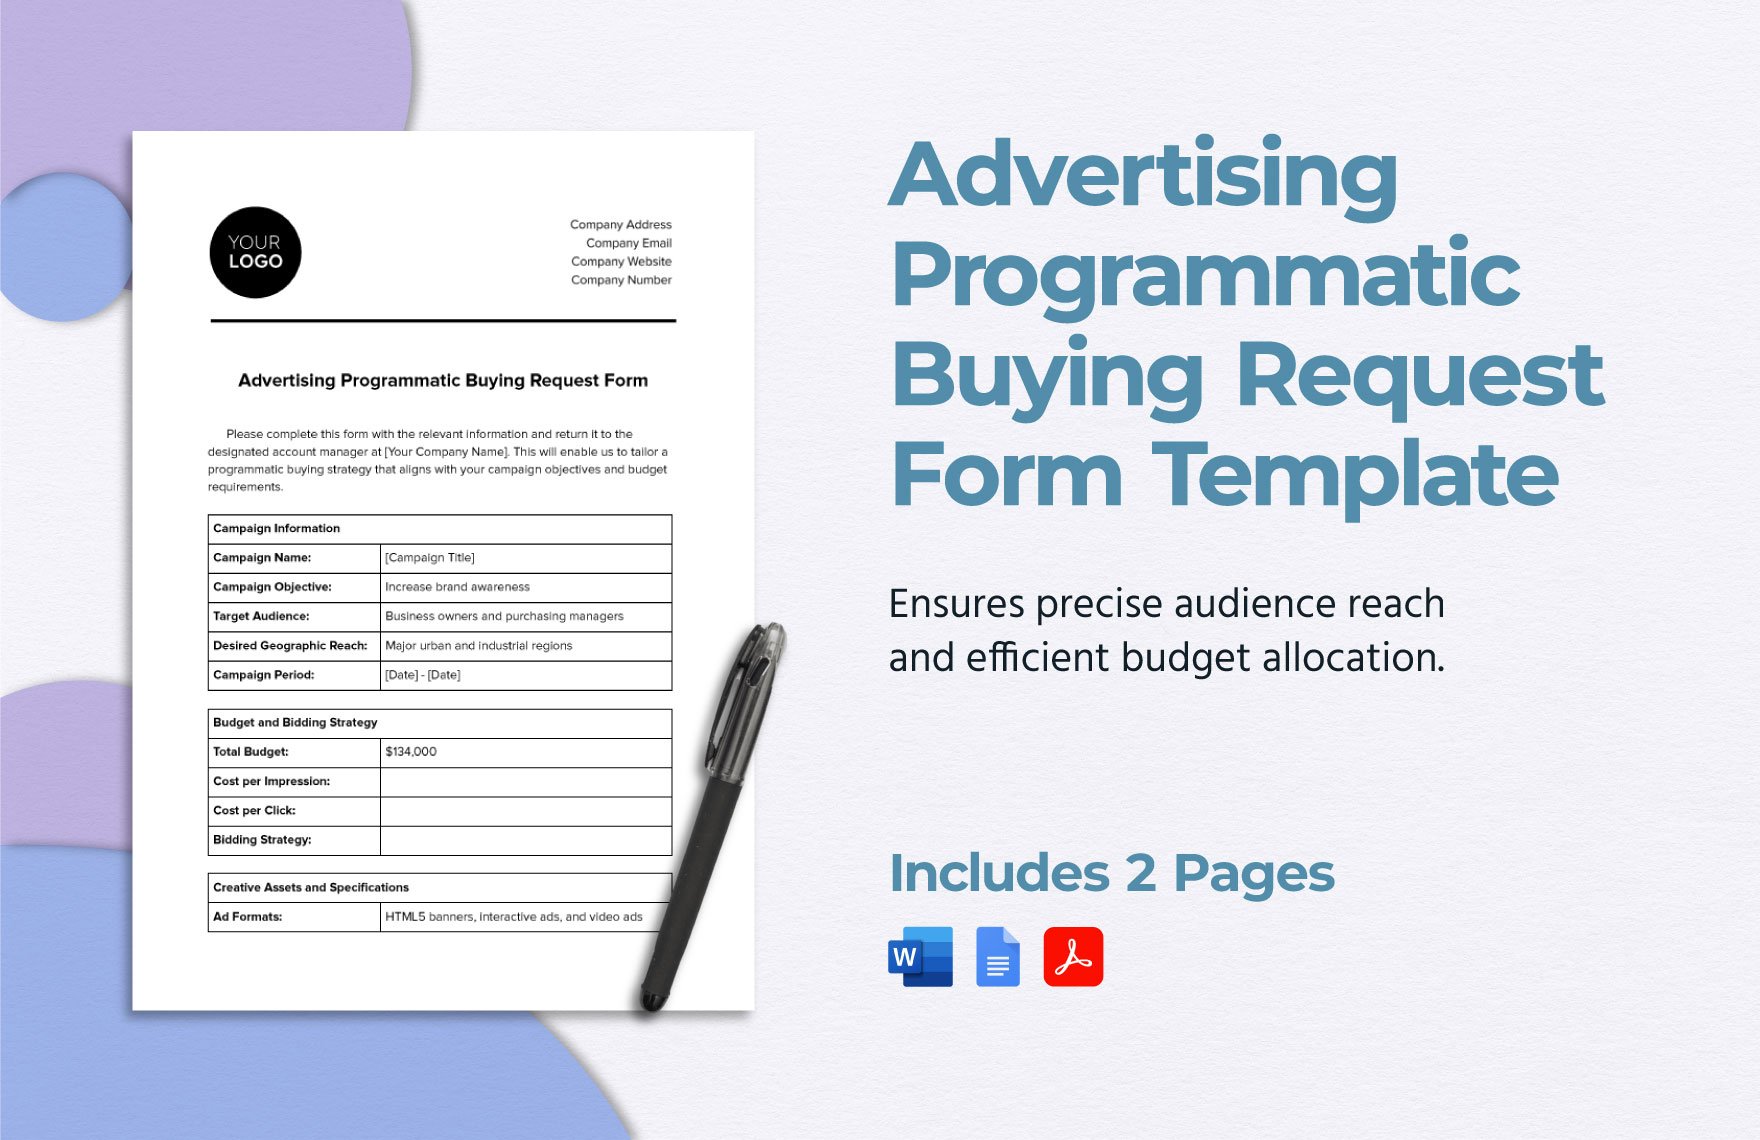 Advertising Programmatic Buying Request Form Template